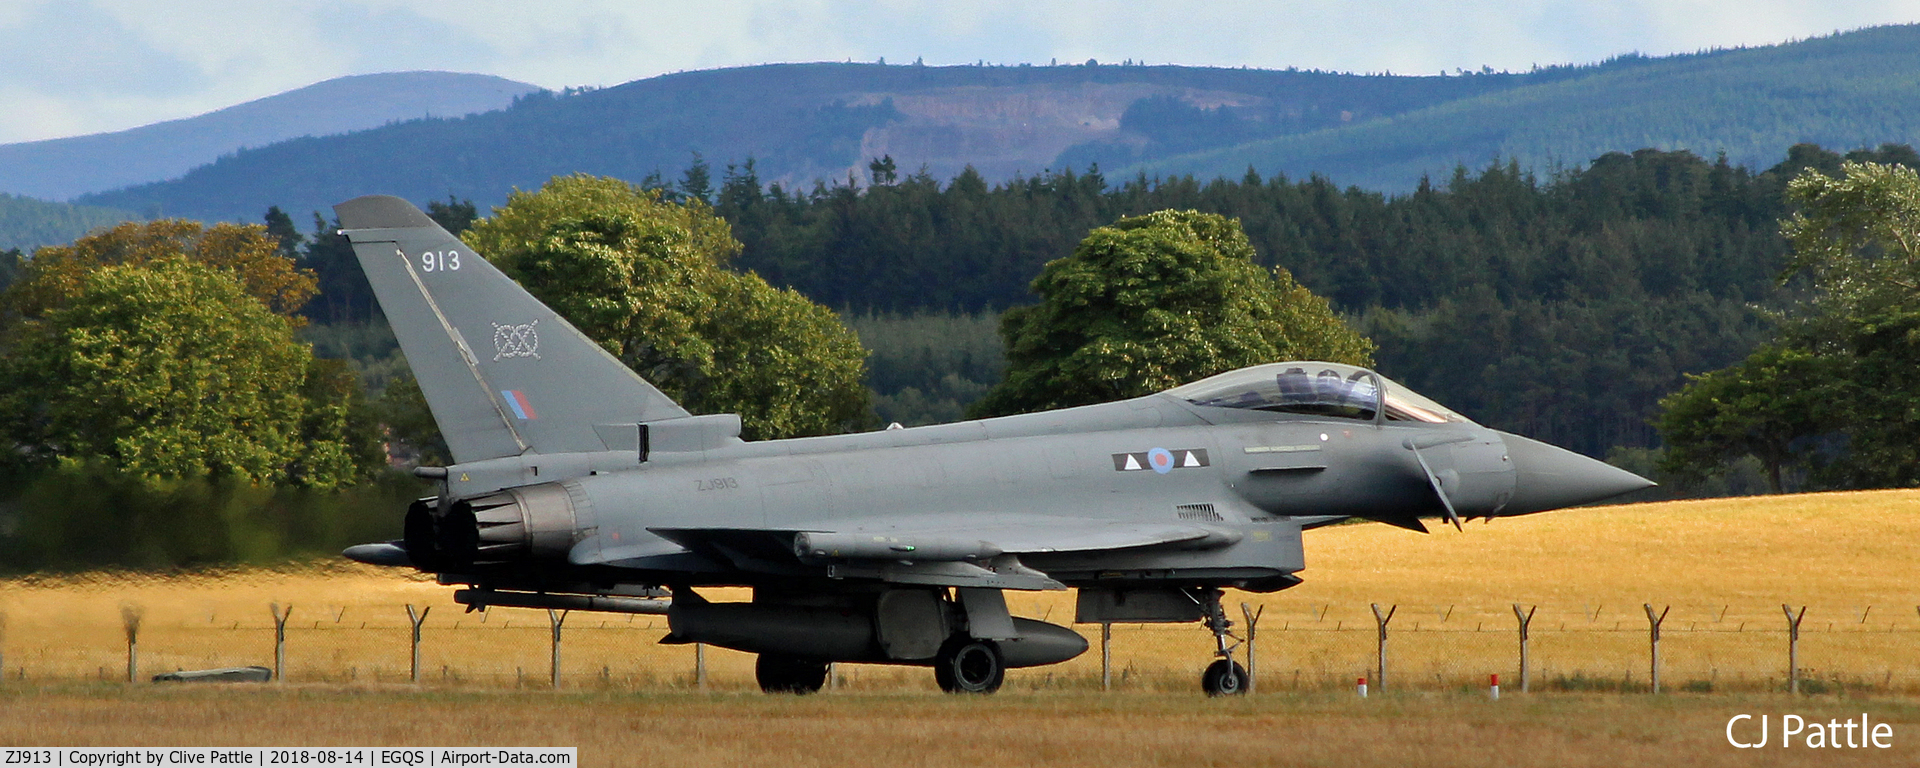 ZJ913, 2004 Eurofighter EF-2000 Typhoon FGR4 C/N 0047/BS004, Long taxy at Lossiemouth